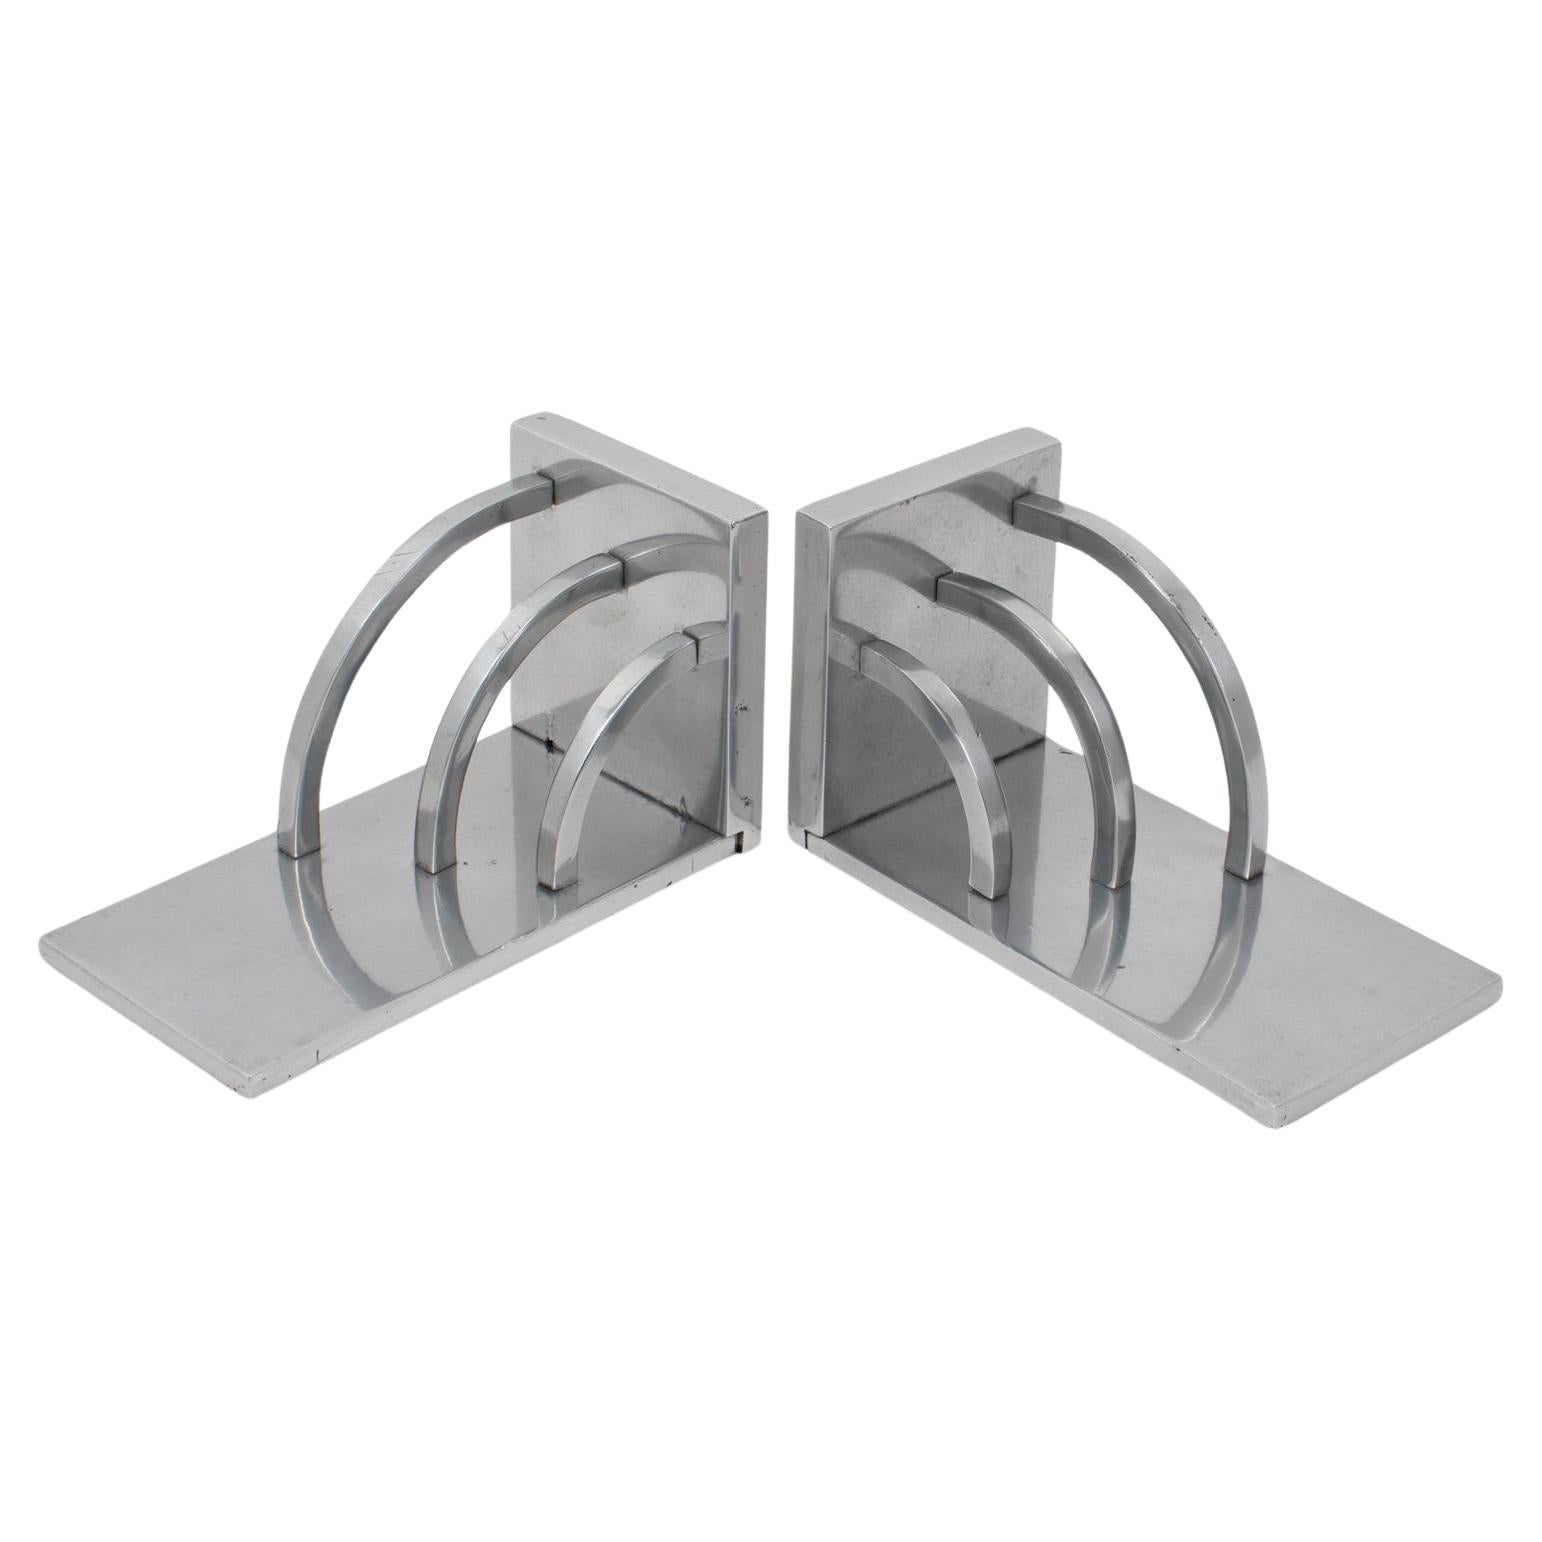 Art Deco Geometric Metal Bookends, attributed to Jacques Adnet, 1940s